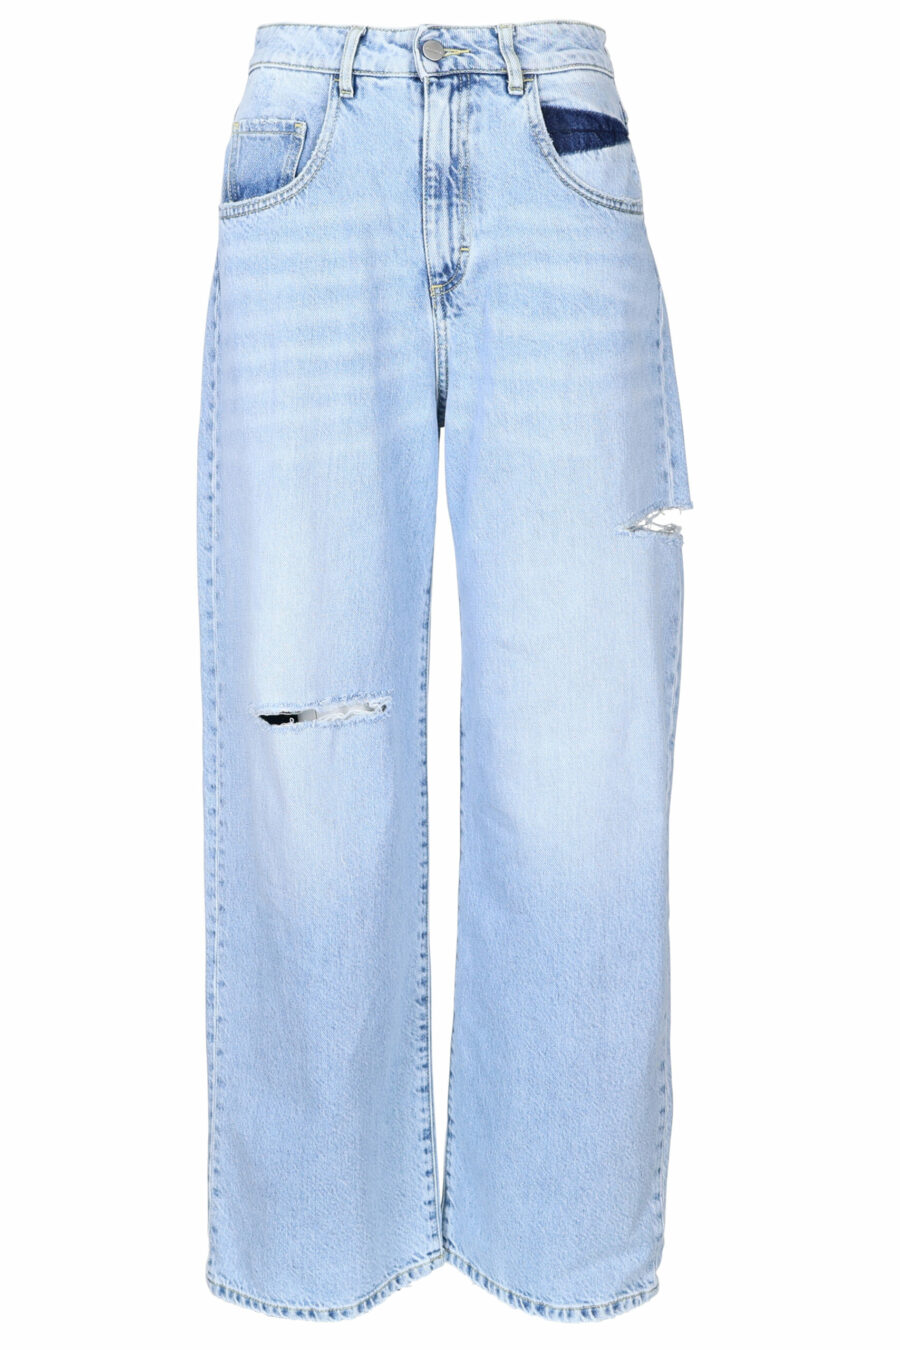 Blue "poppy" jeans with rips - 8052691167298 scaled